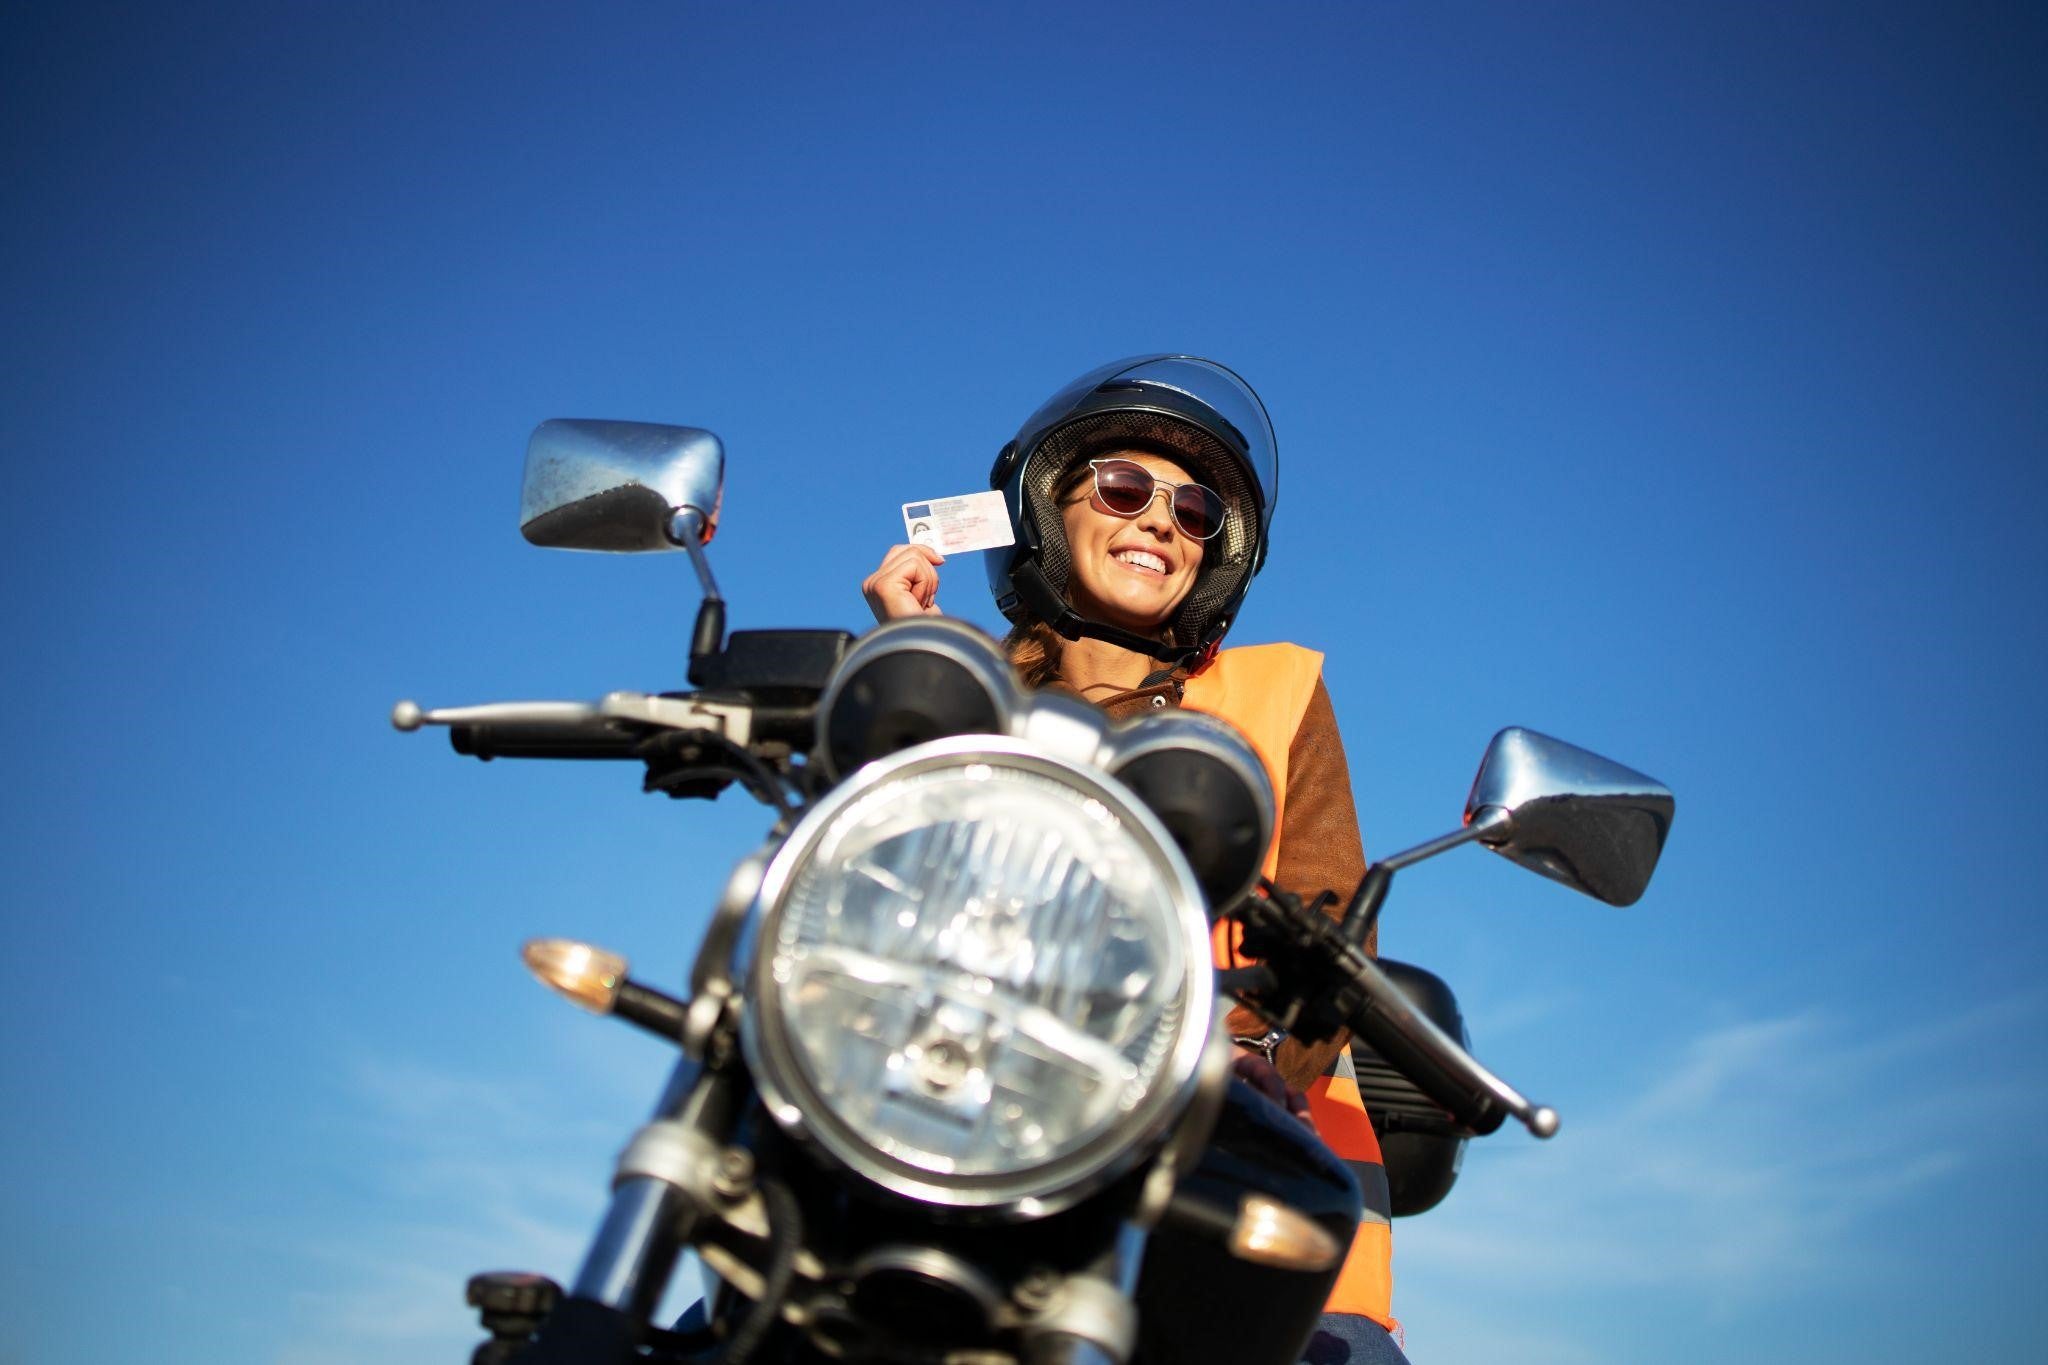 Introduction - Nevada Motorcycle License Laws